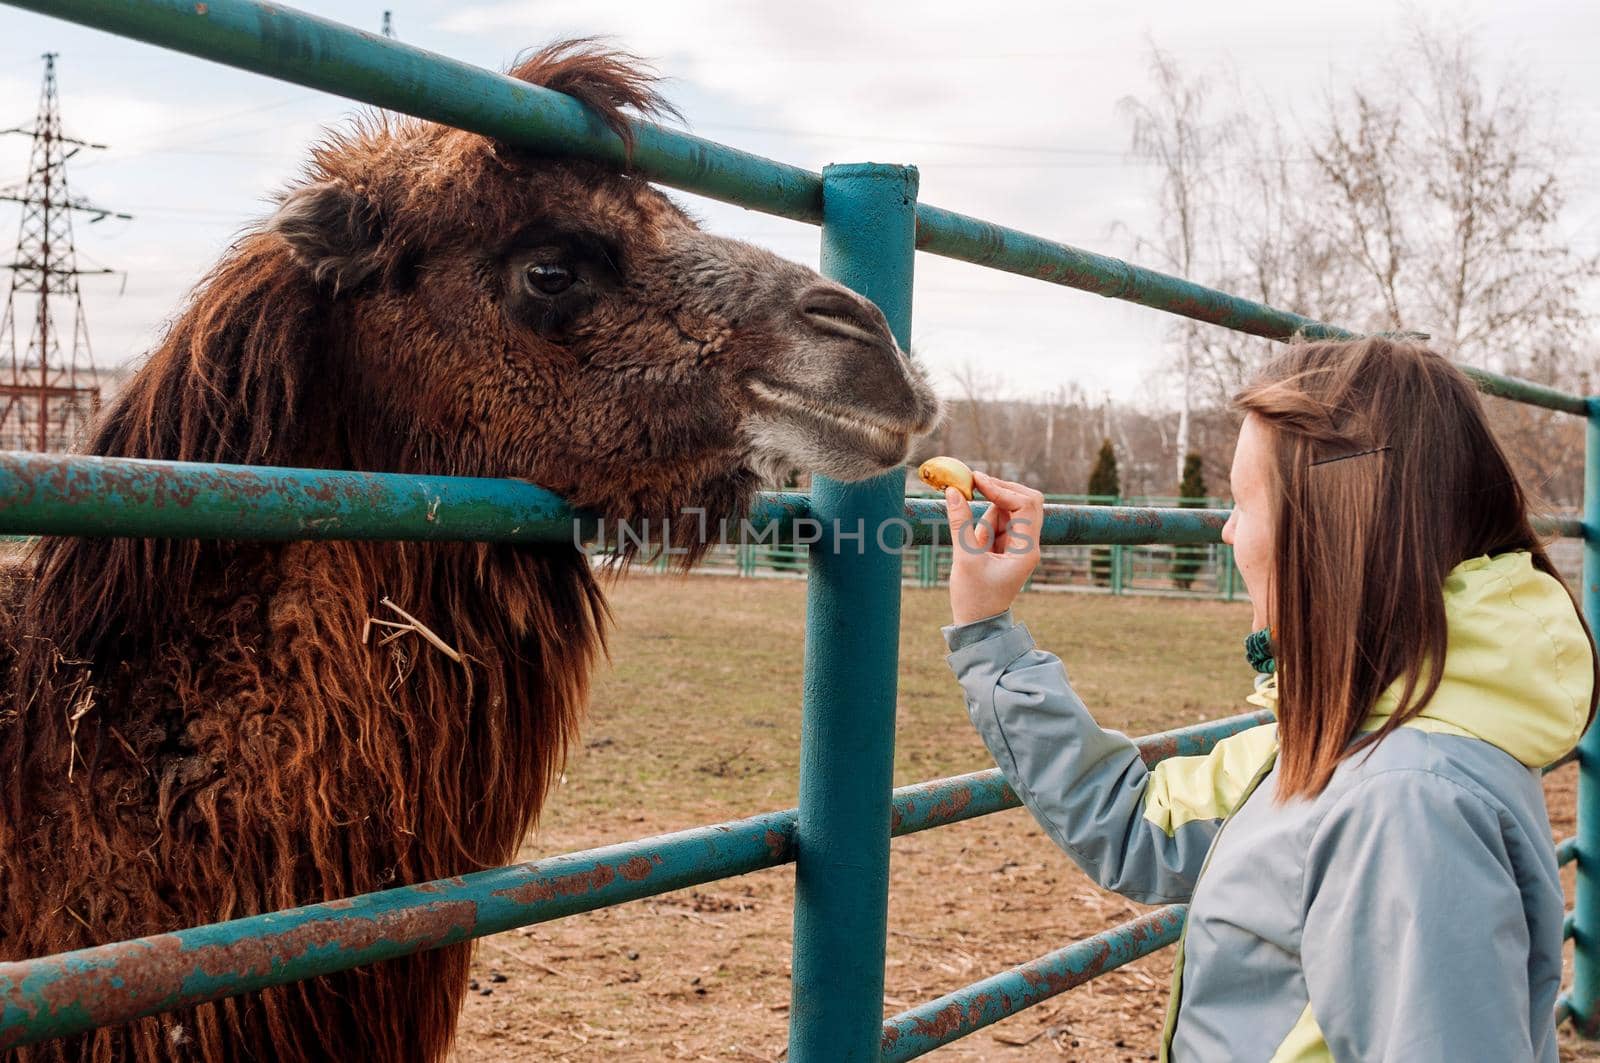 A girl feeds apples from a brown Bactrian camel. The animal is on the farm at the zoo. Camelus bactrianus, a large ungulate animal that lives in the steppes of Central Asia.